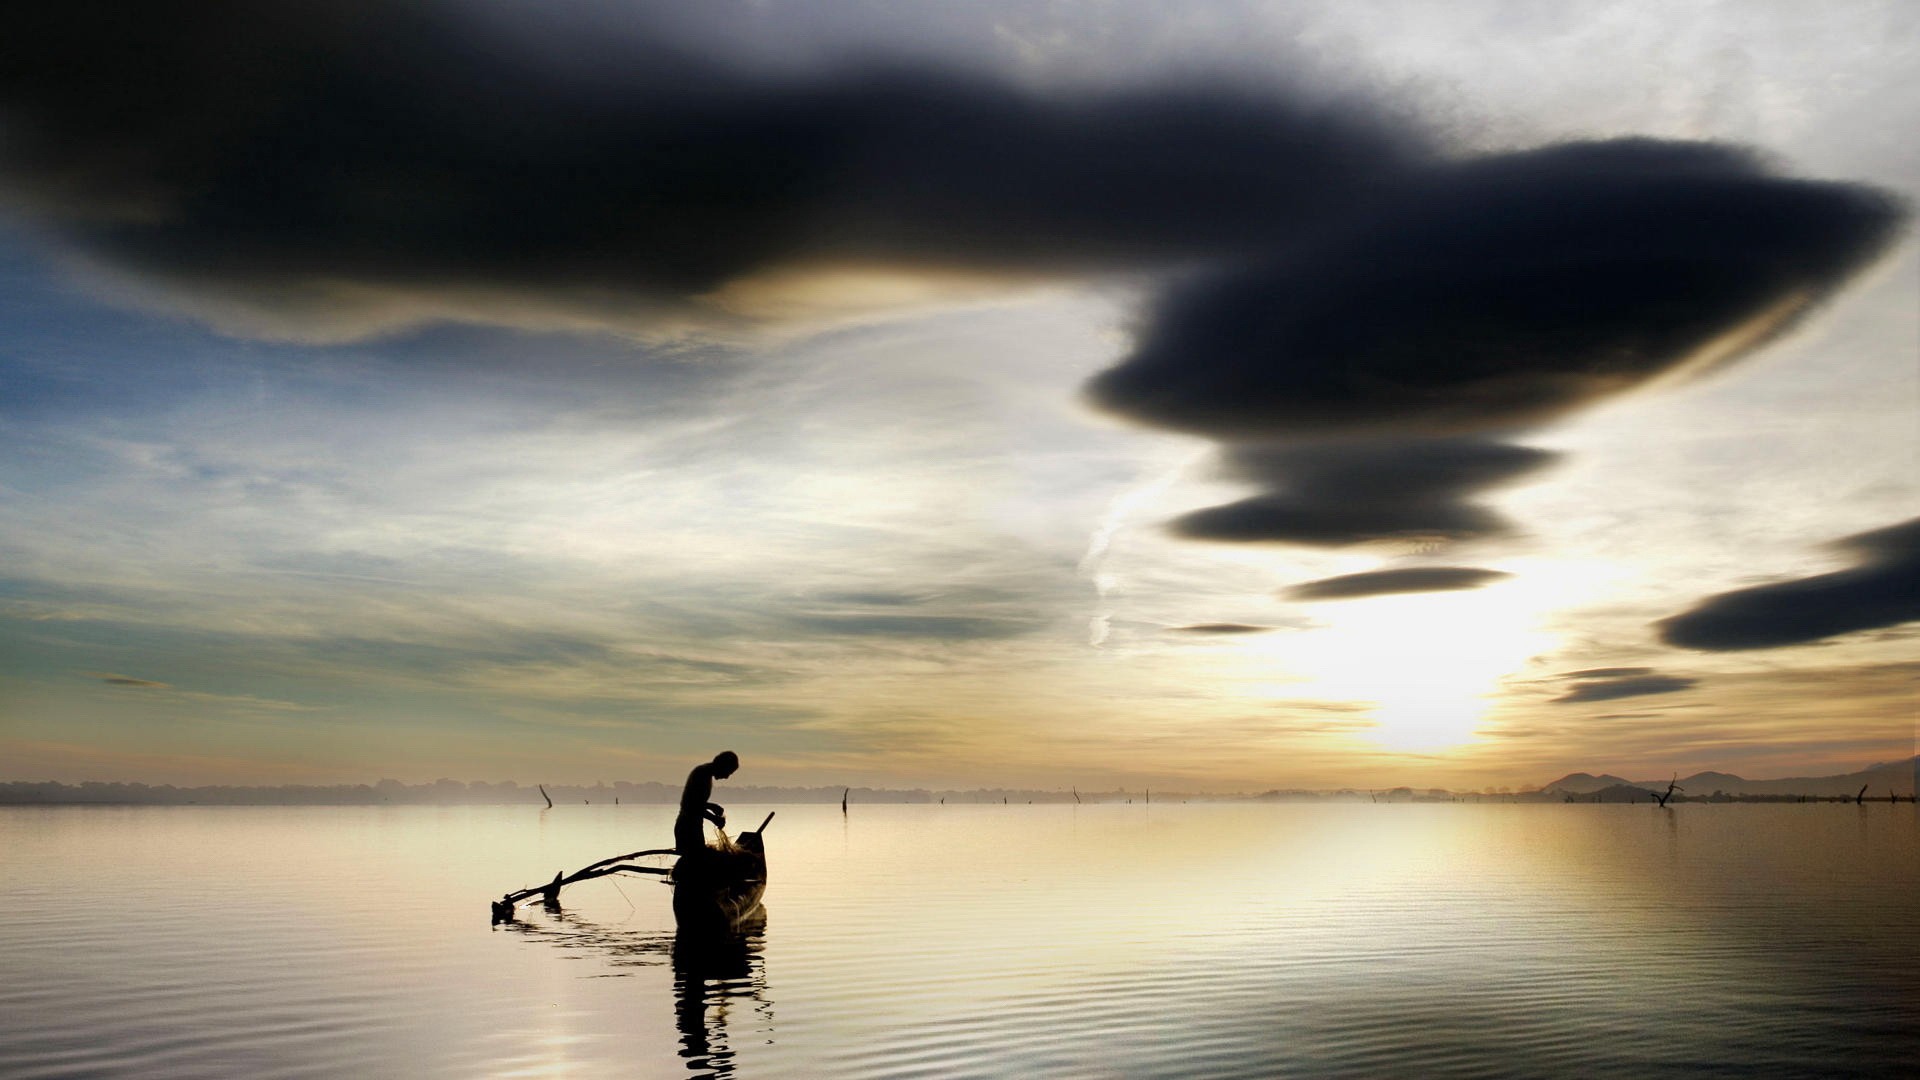 General 1920x1080 boat fisherman sky clouds outdoors nature